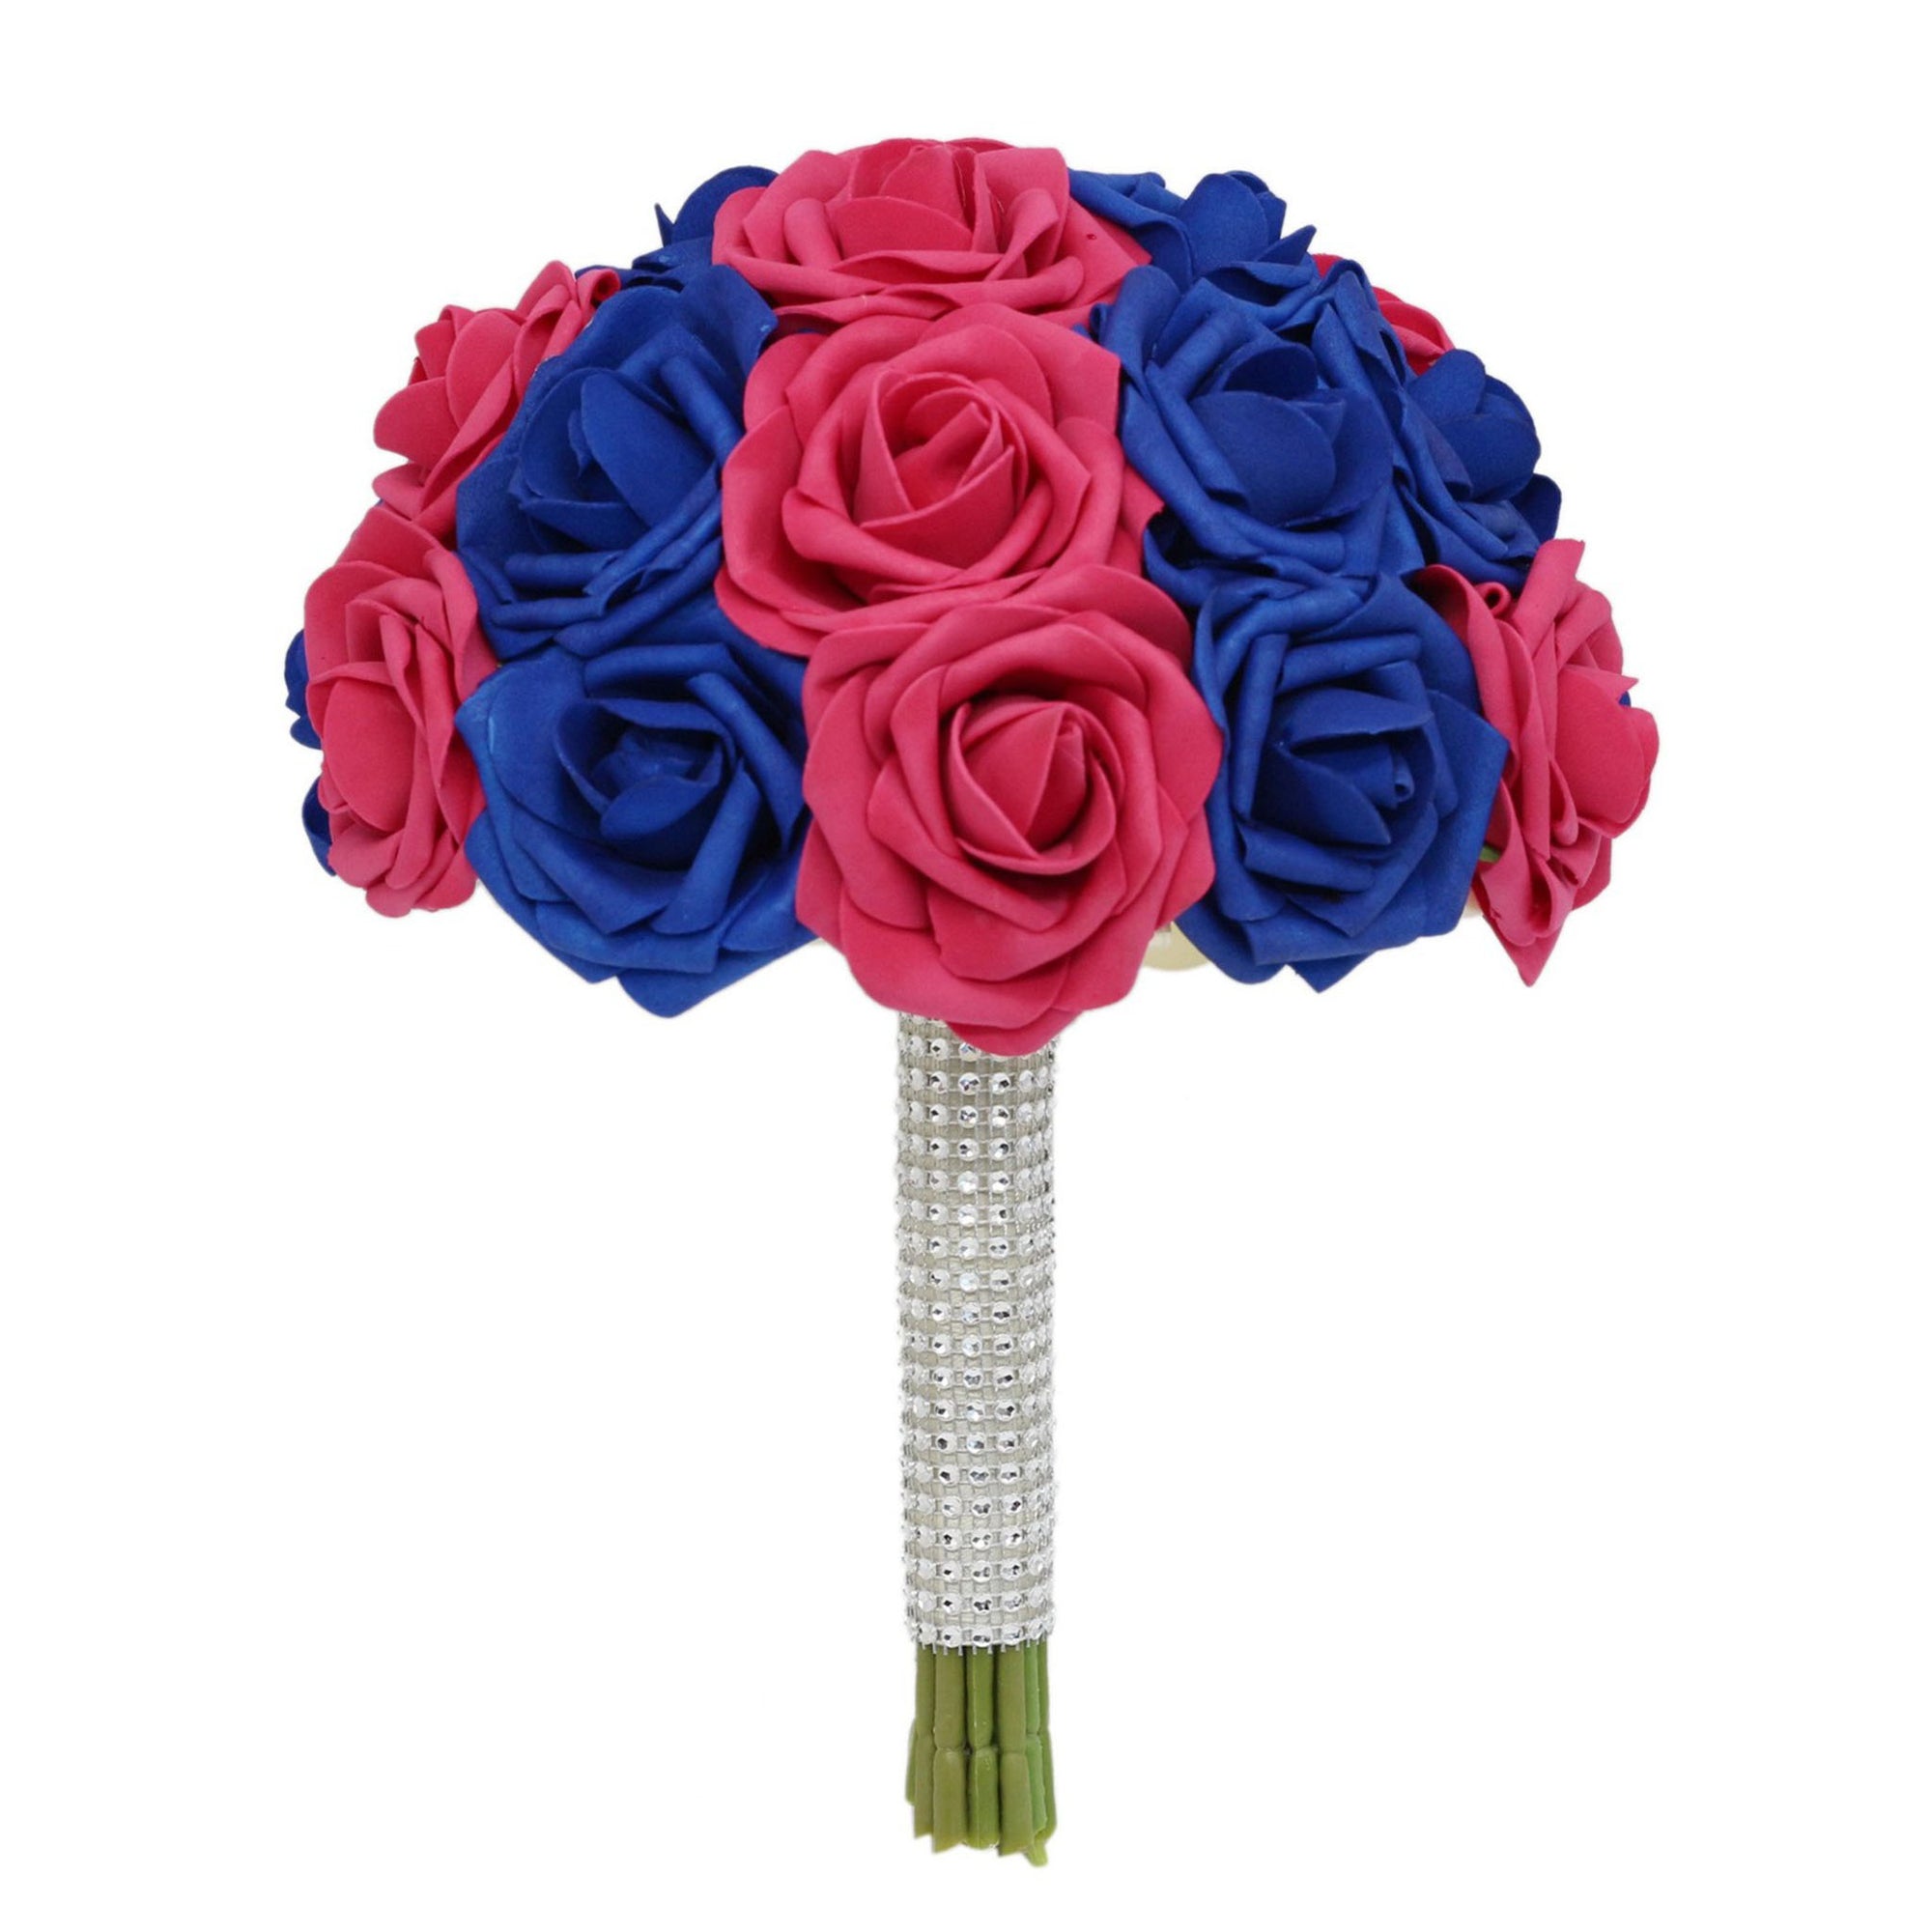 Hot Pink and Royal Blue Bouquet of Roses Wedding Flowers